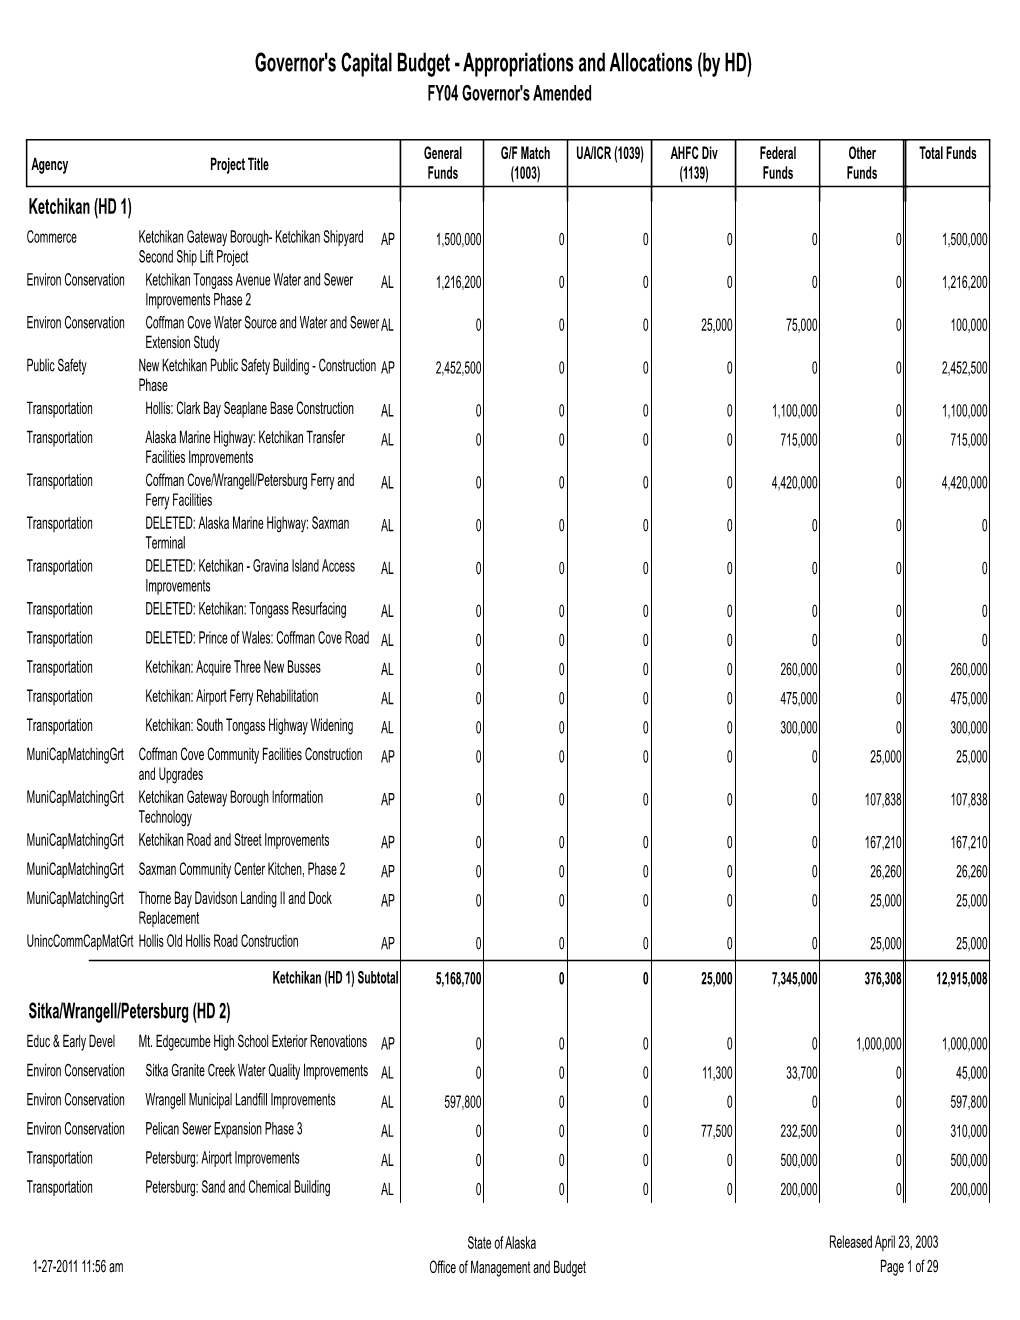 Governor's Capital Budget - Appropriations and Allocations (By HD) FY04 Governor's Amended